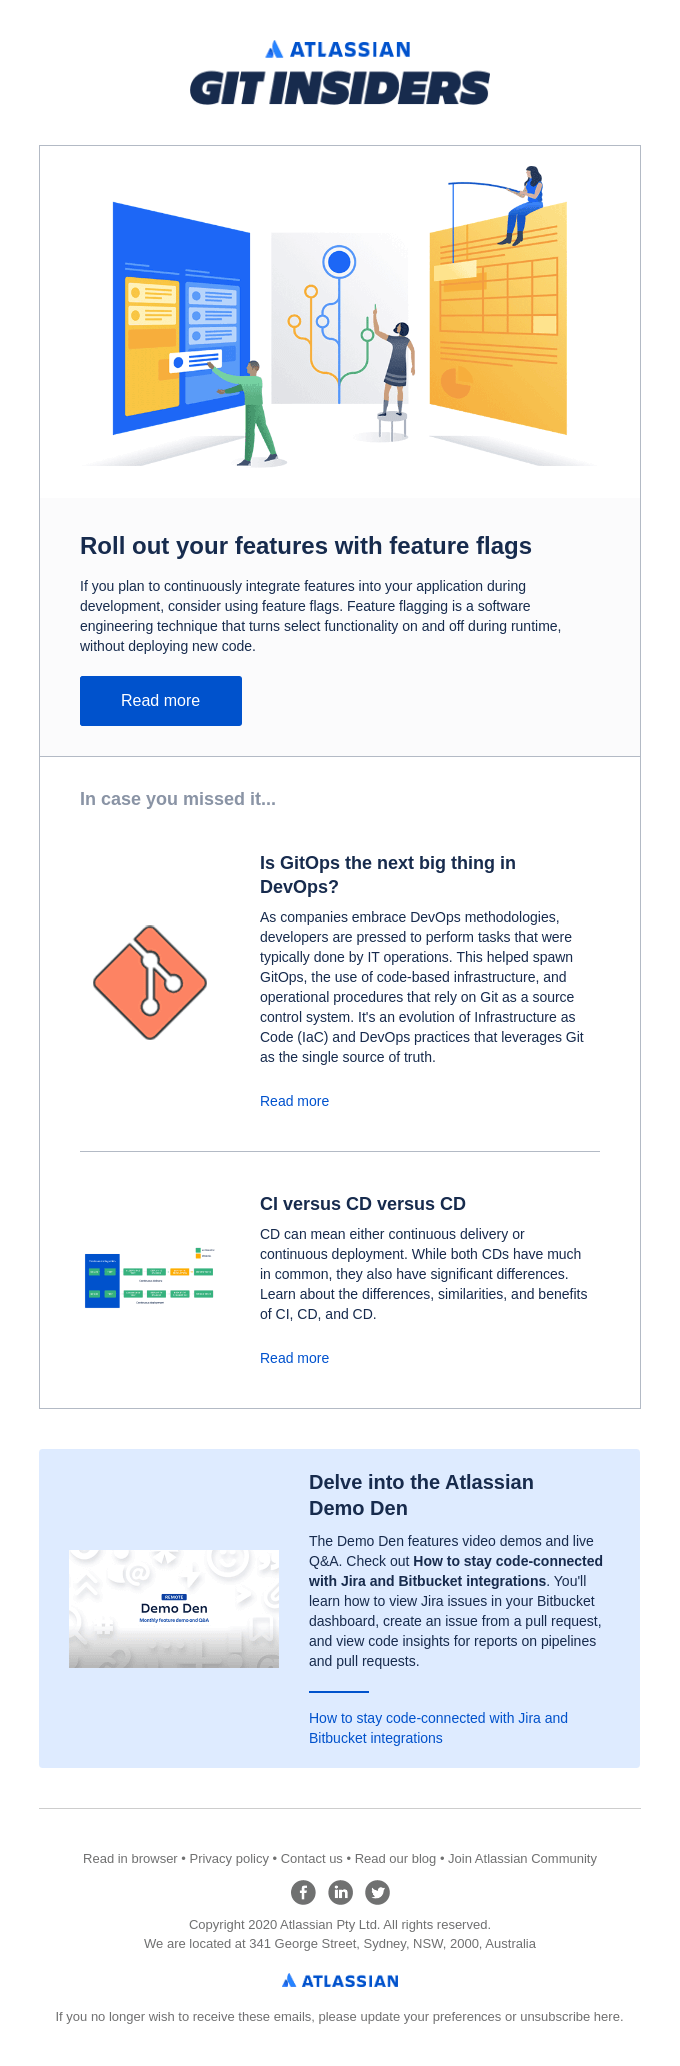 Roll out your features with feature flags - Atlassian Email Newsletter